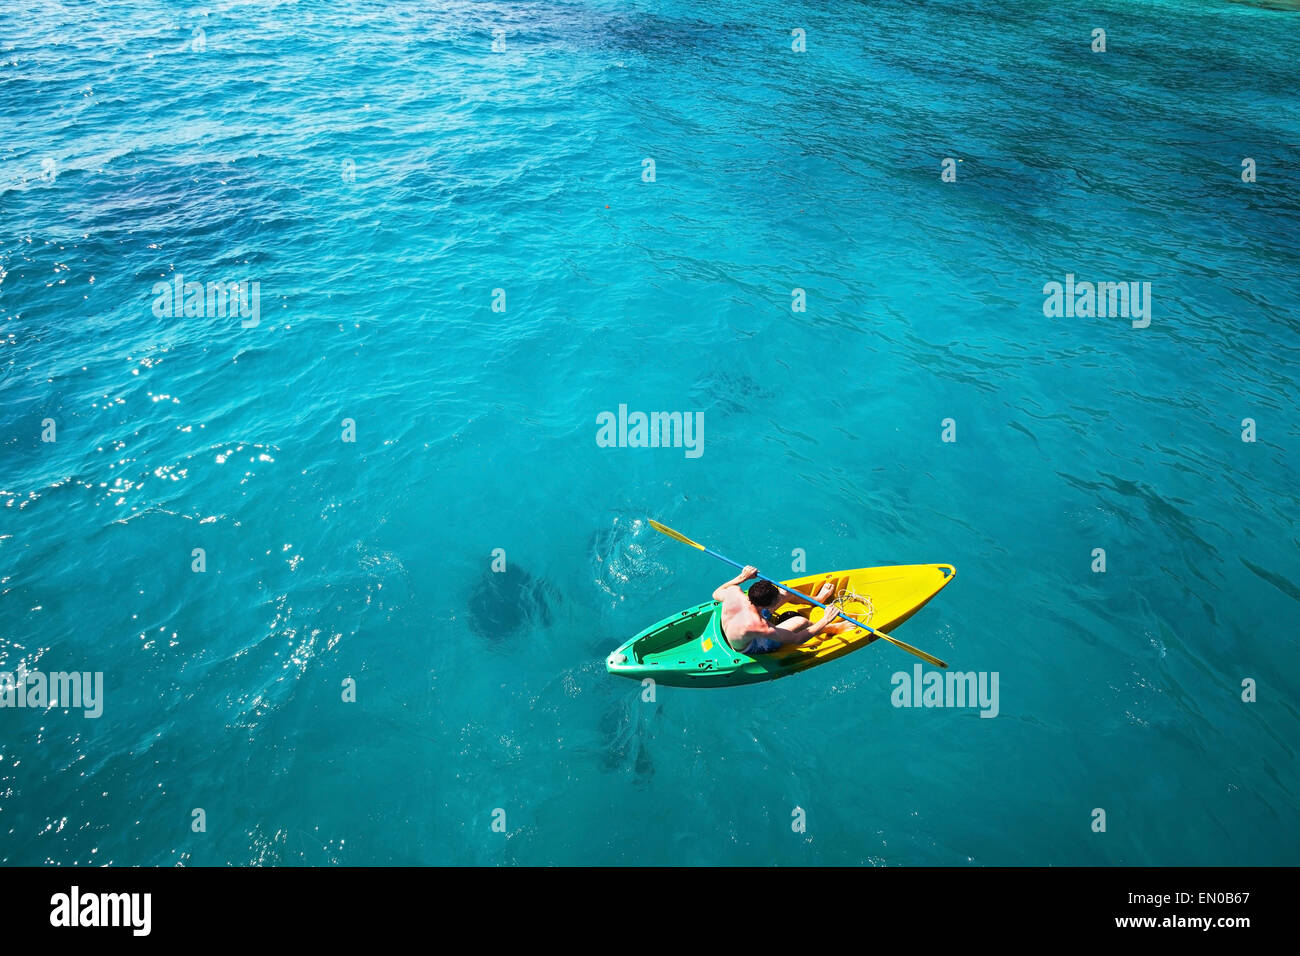 top view of man paddling on kayak in turquoise water Stock Photo